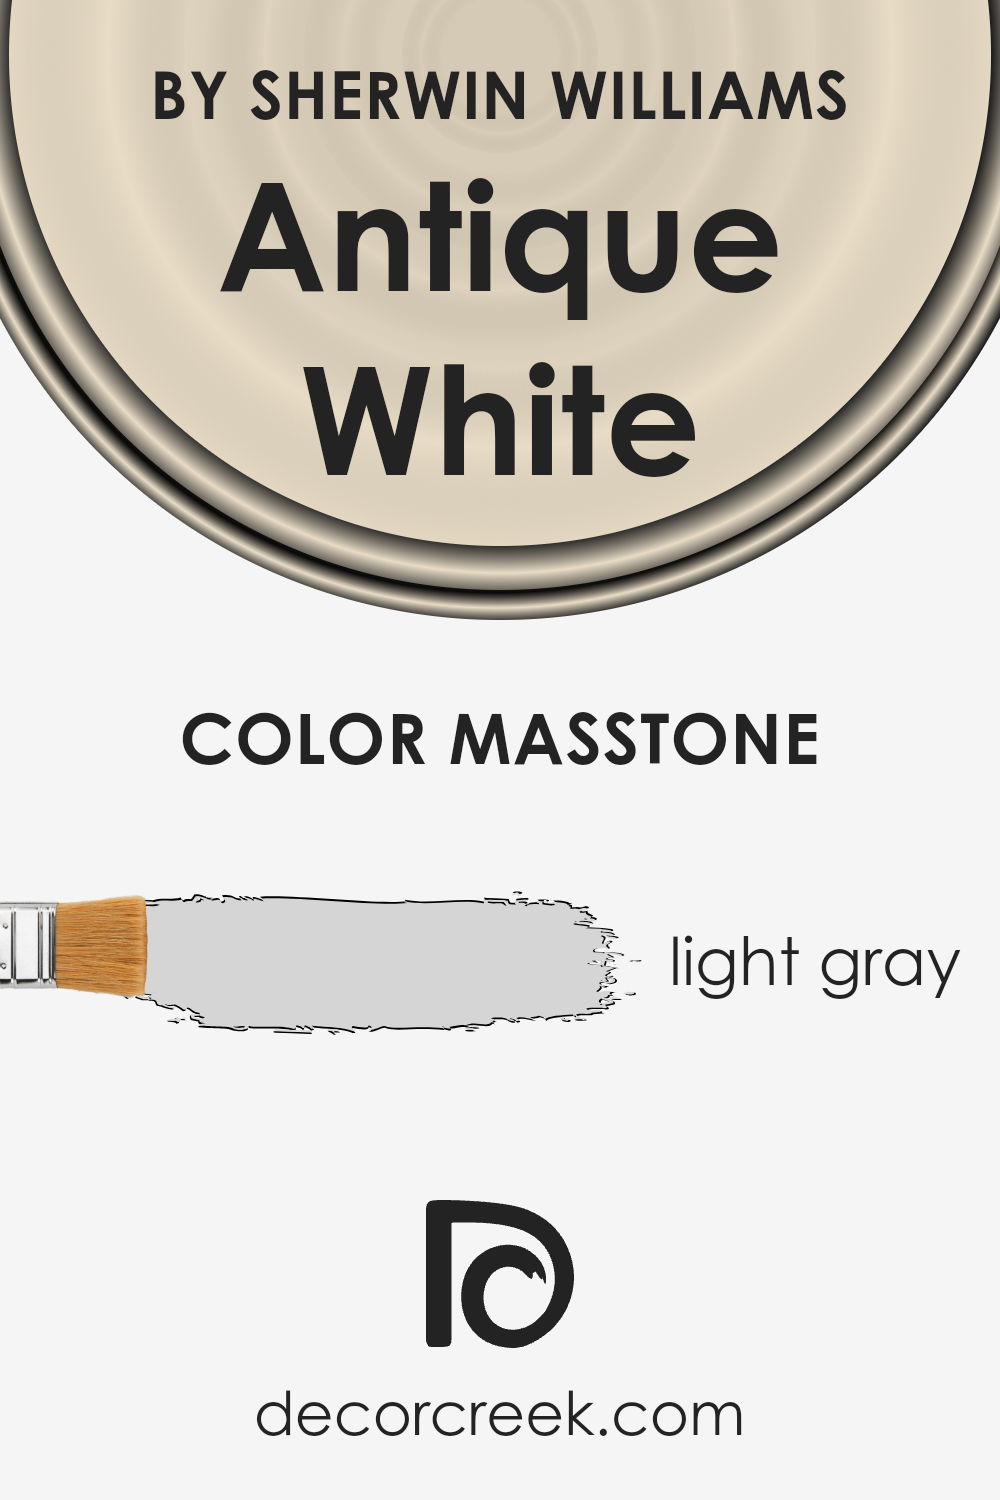 what_is_the_masstone_of_antique_white_sw_6119